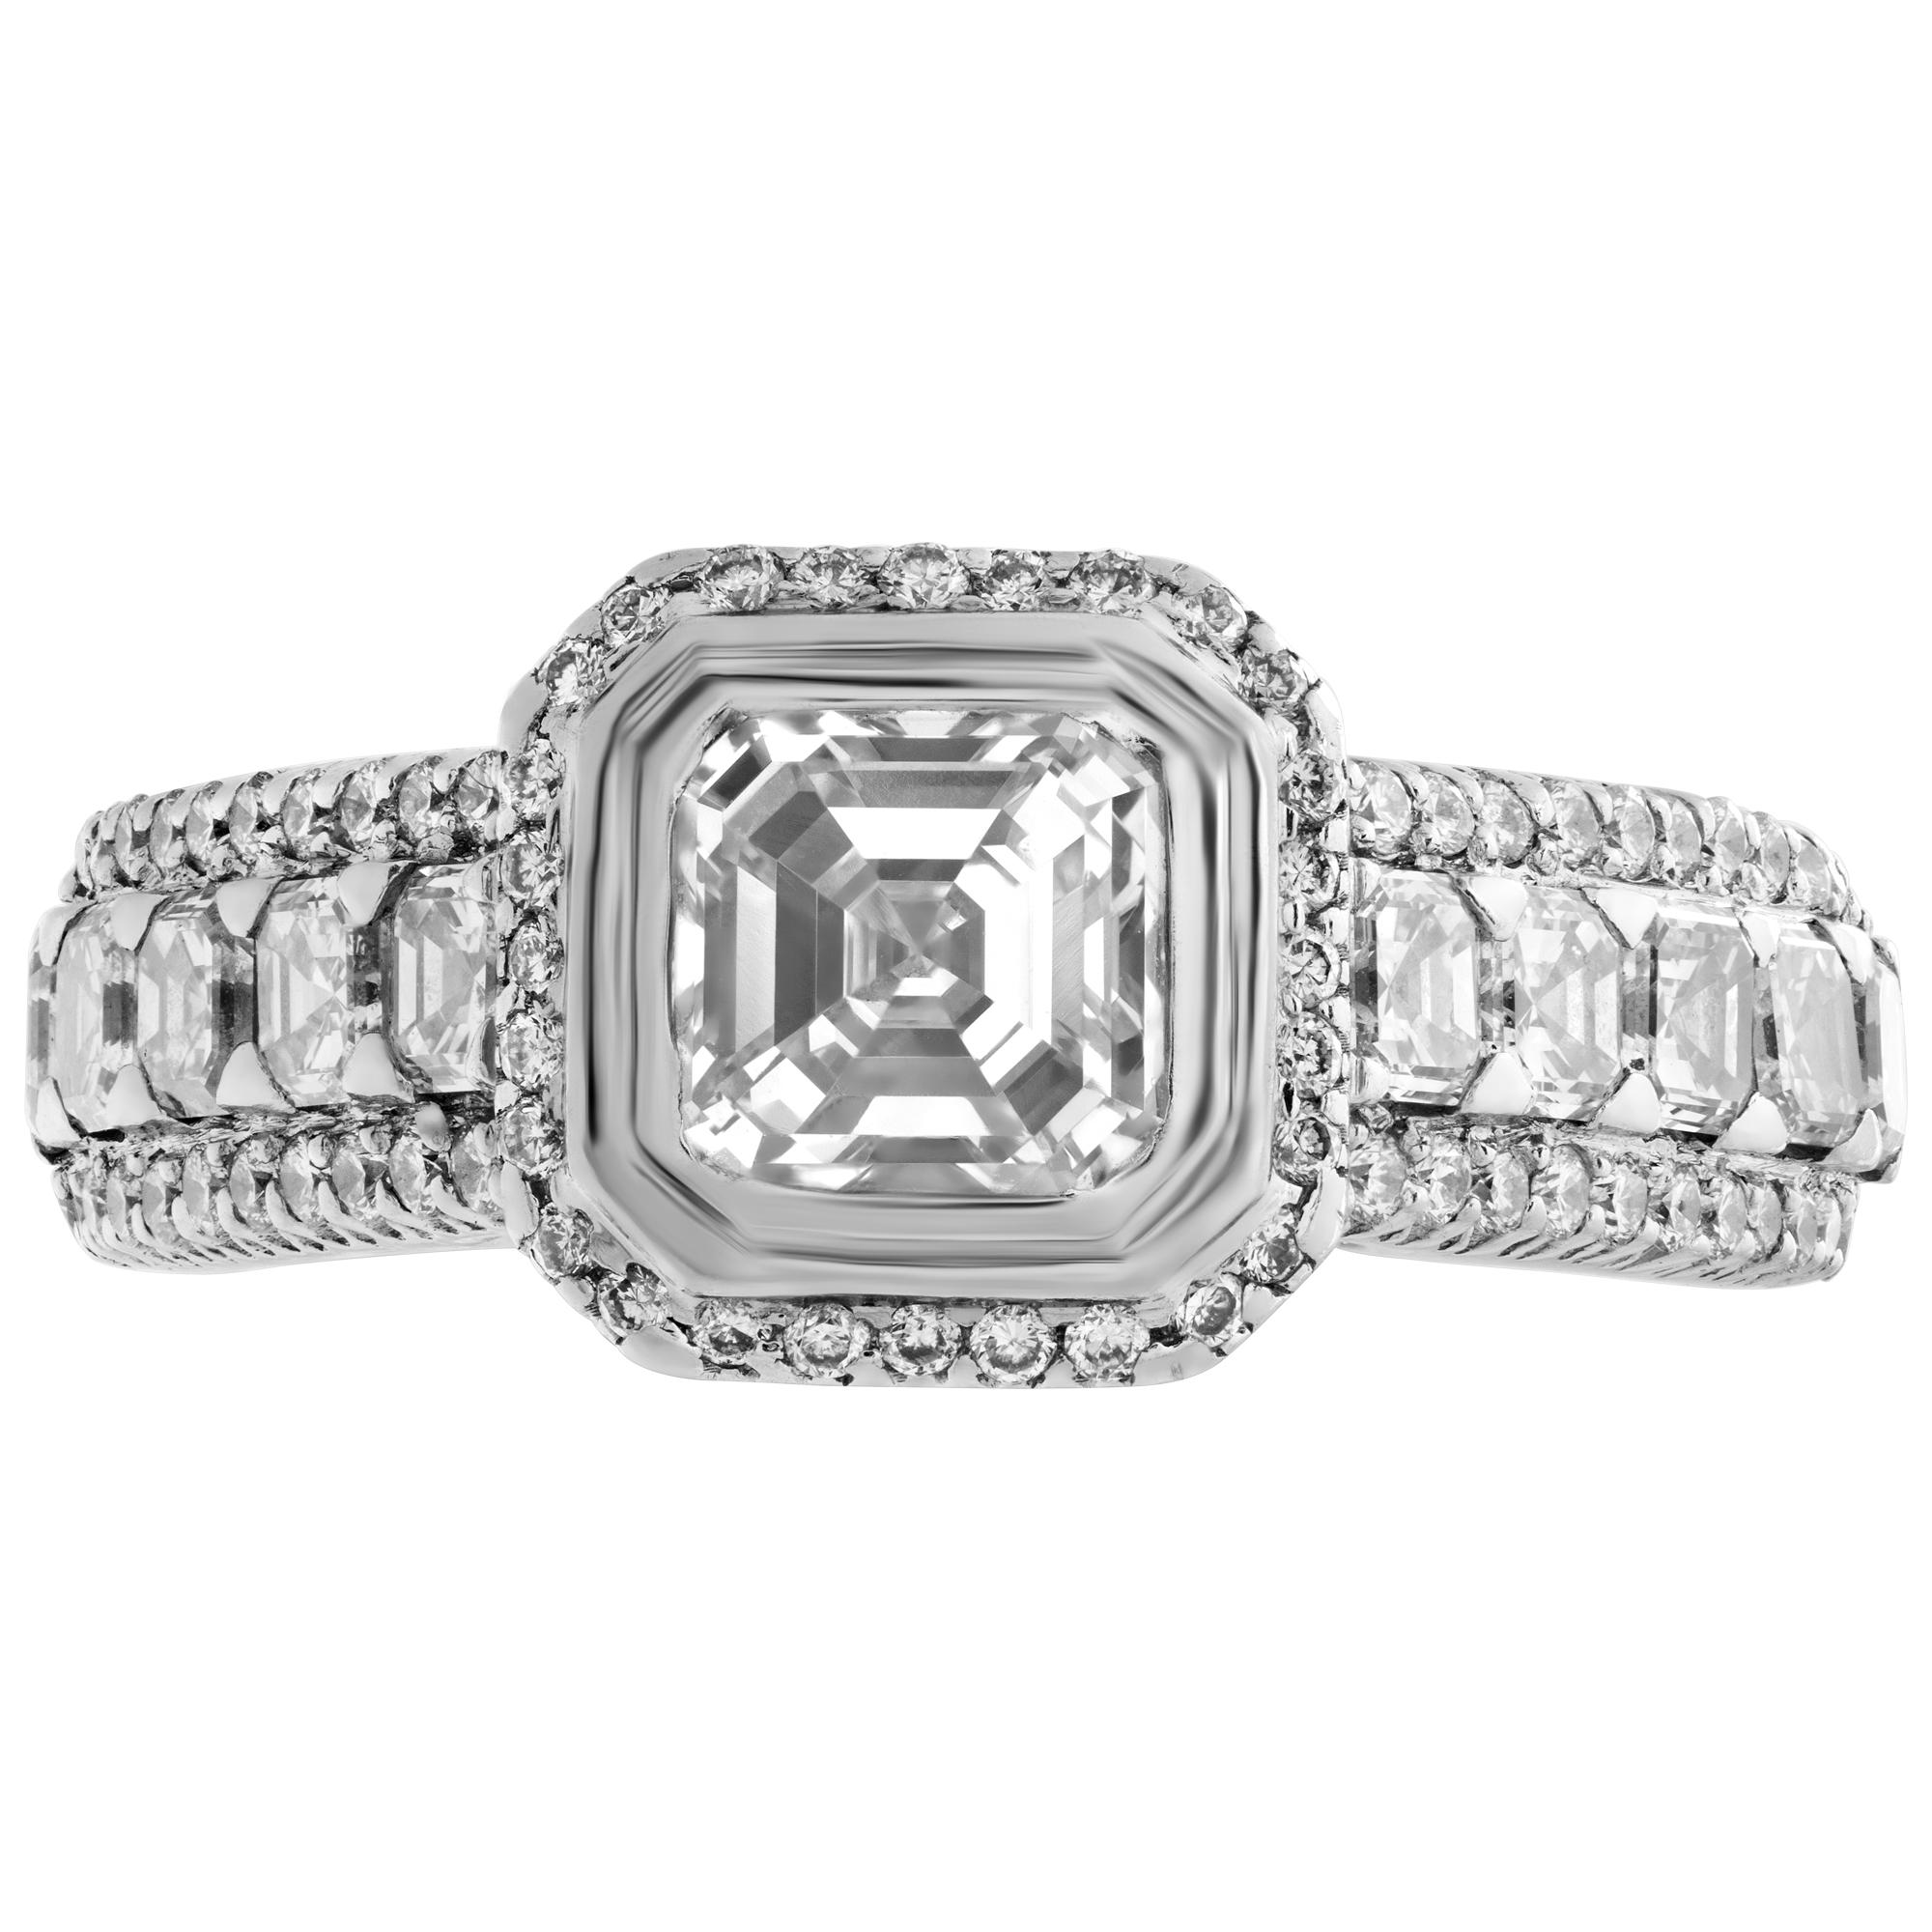 Sparkling and very special diamond ring with approximately 1.05 carat mounted diamond (J-K color, VS1 clarity) set in lovely 18k white gold diamond accents setting. Size 5, width 3mm - 9mm.This Diamond ring is currently size 5 and some items can be